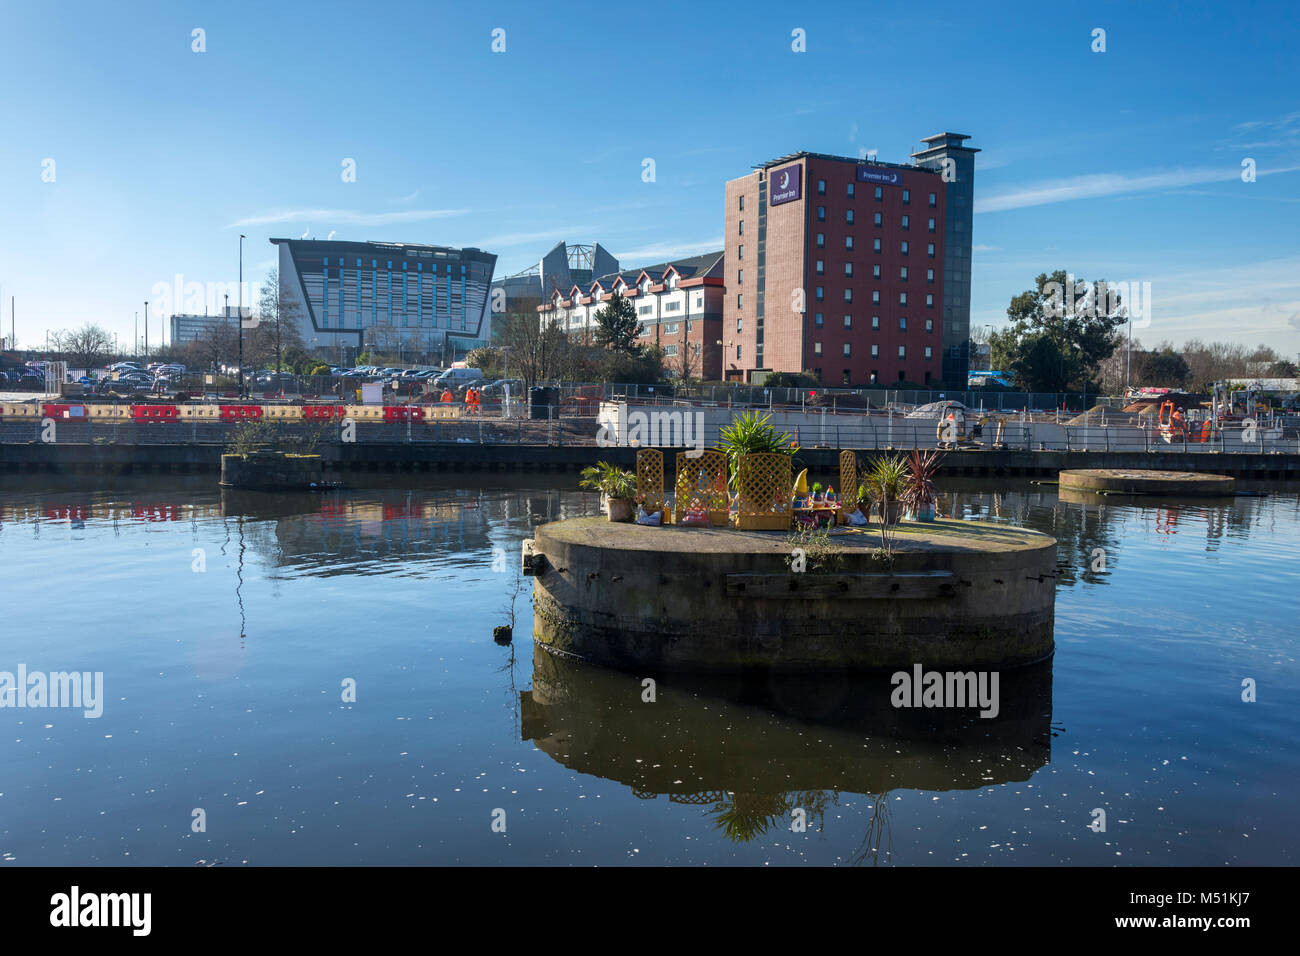 The Hotel Football and the Premier Inn at Old Trafford, from the Manchester Ship Canal, Manchester, England, UK. Stock Photo